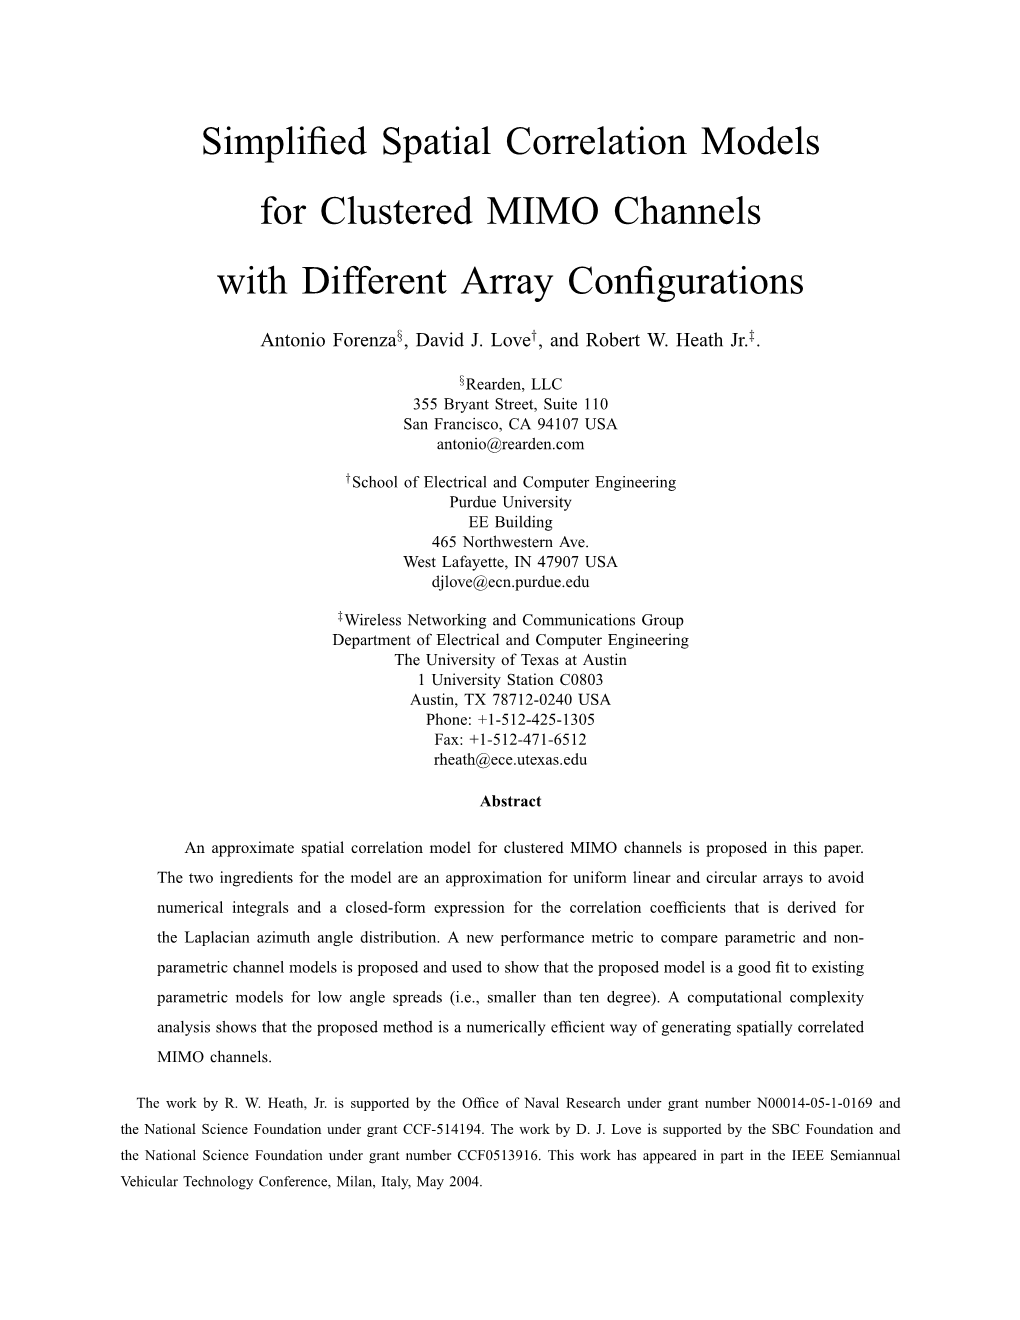 Simplified Spatial Correlation Models for Clustered MIMO Channels With